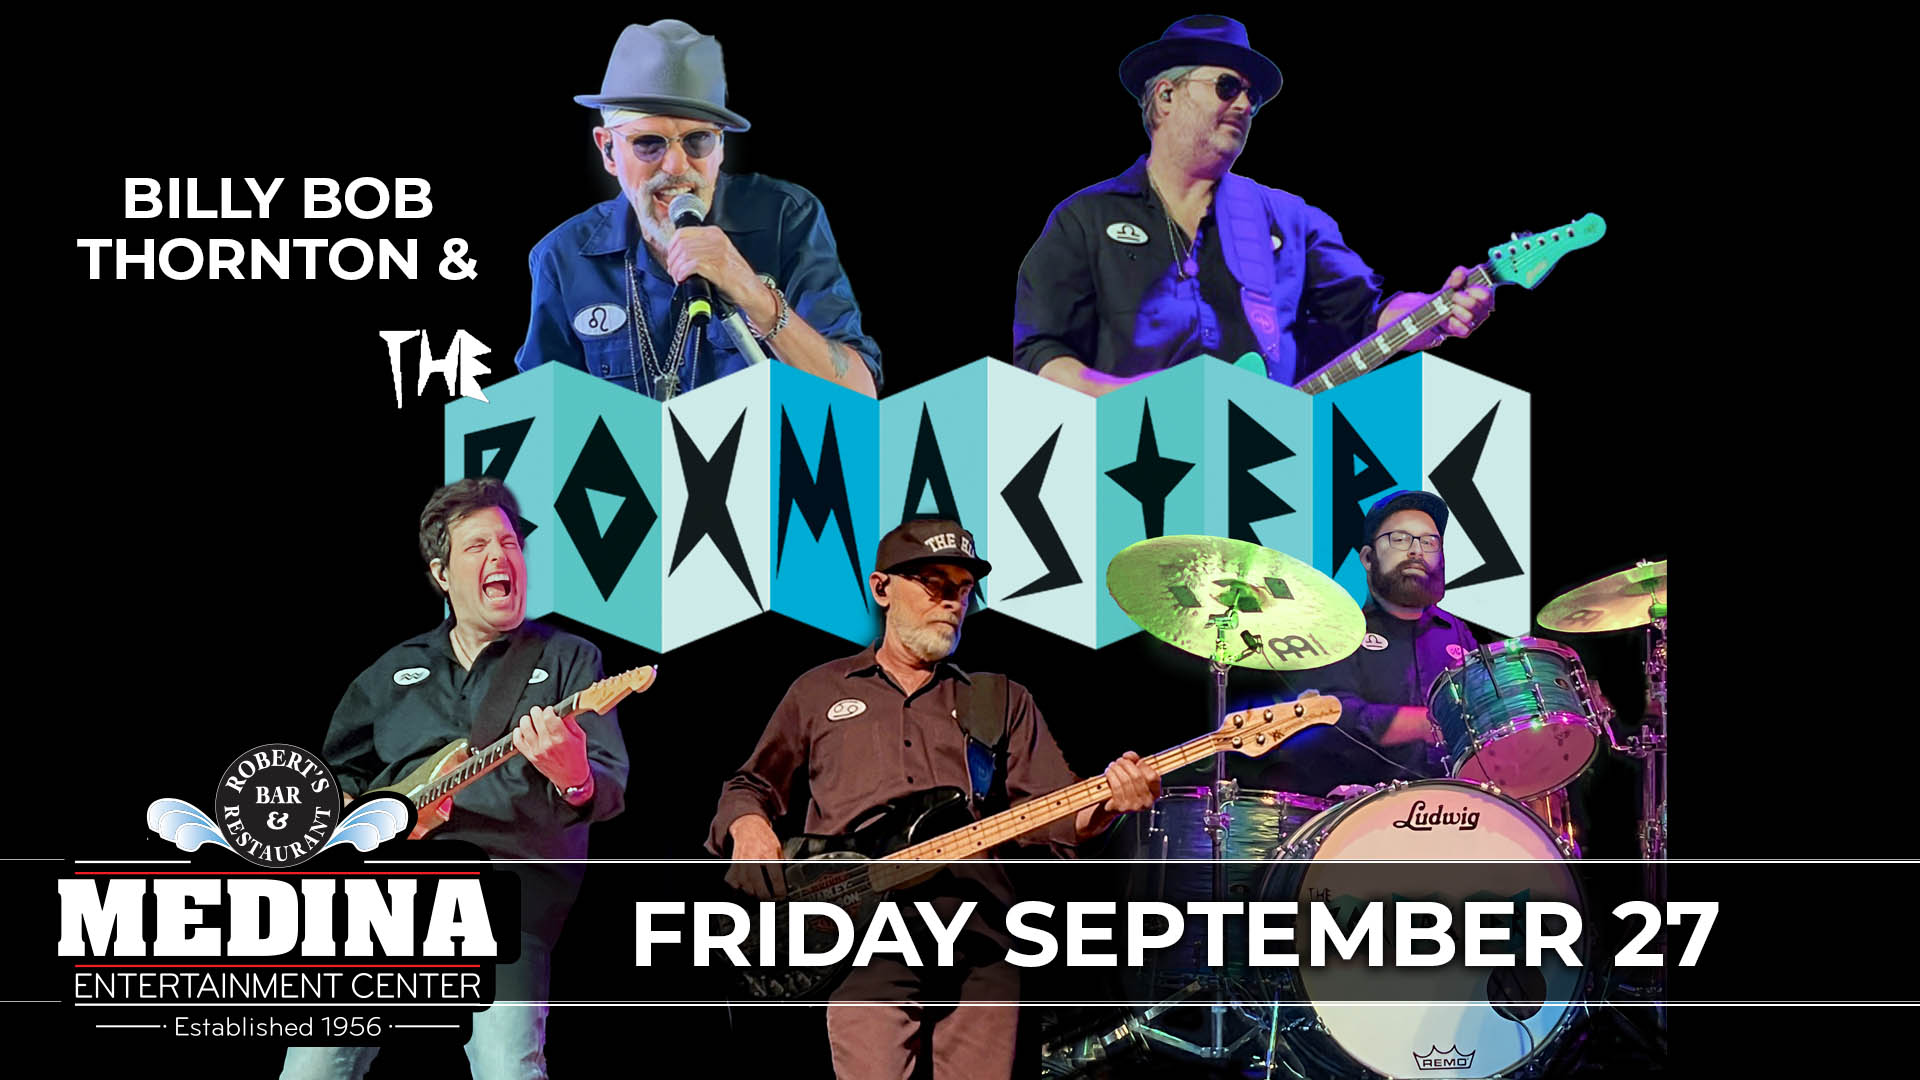 Billy Bob Thornton & The Boxmasters with guest The Jorgensens Friday, September 27 Medina Entertainment Center Doors: 7:00PM | Music: 8:00PM | 21+ Gold Reserved $35 / Silver Reserved $30 / General Seating $20 (plus applicable fees)